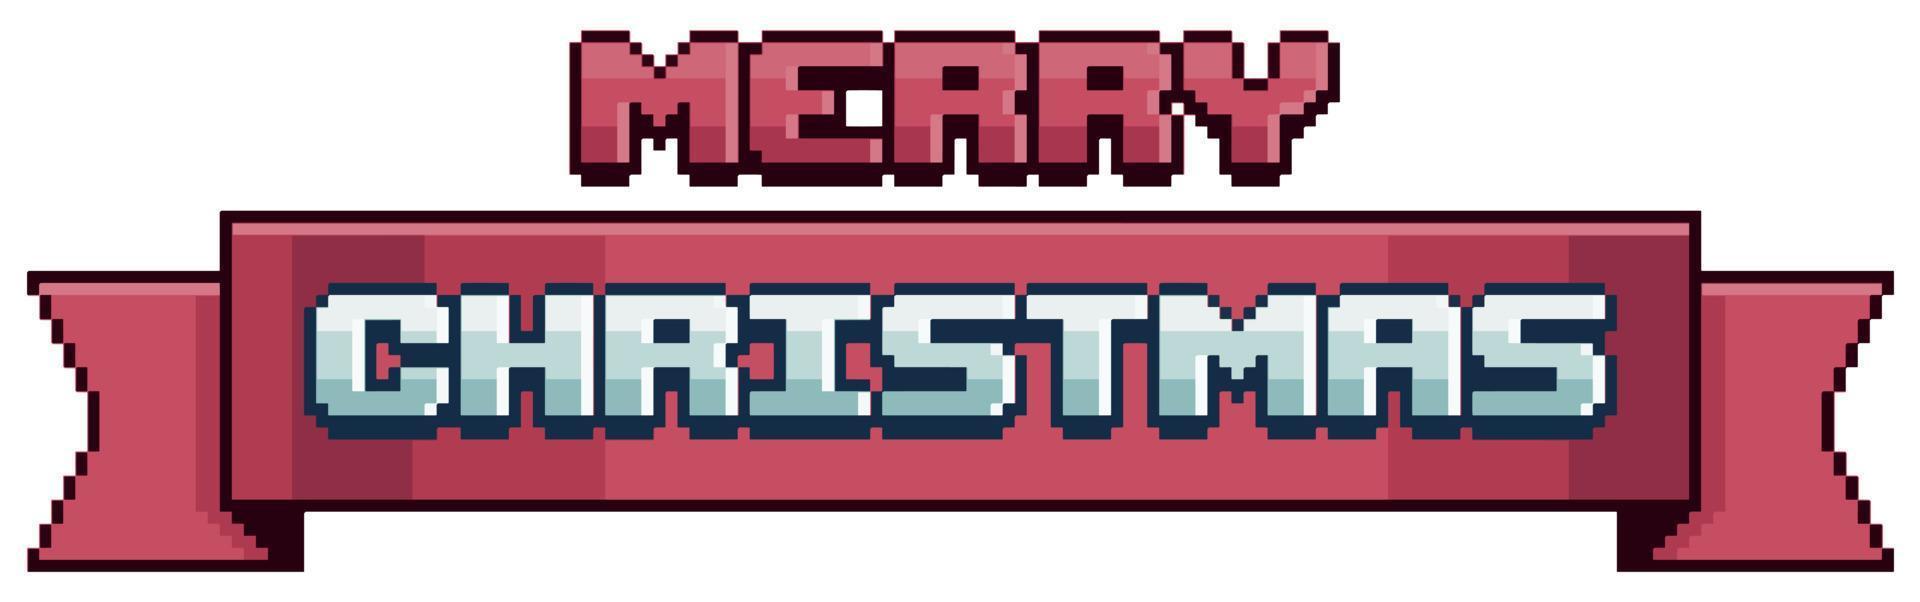 Pixel art merry christmas on red banner. Christmas ribbon vector icon for 8bit game on white background